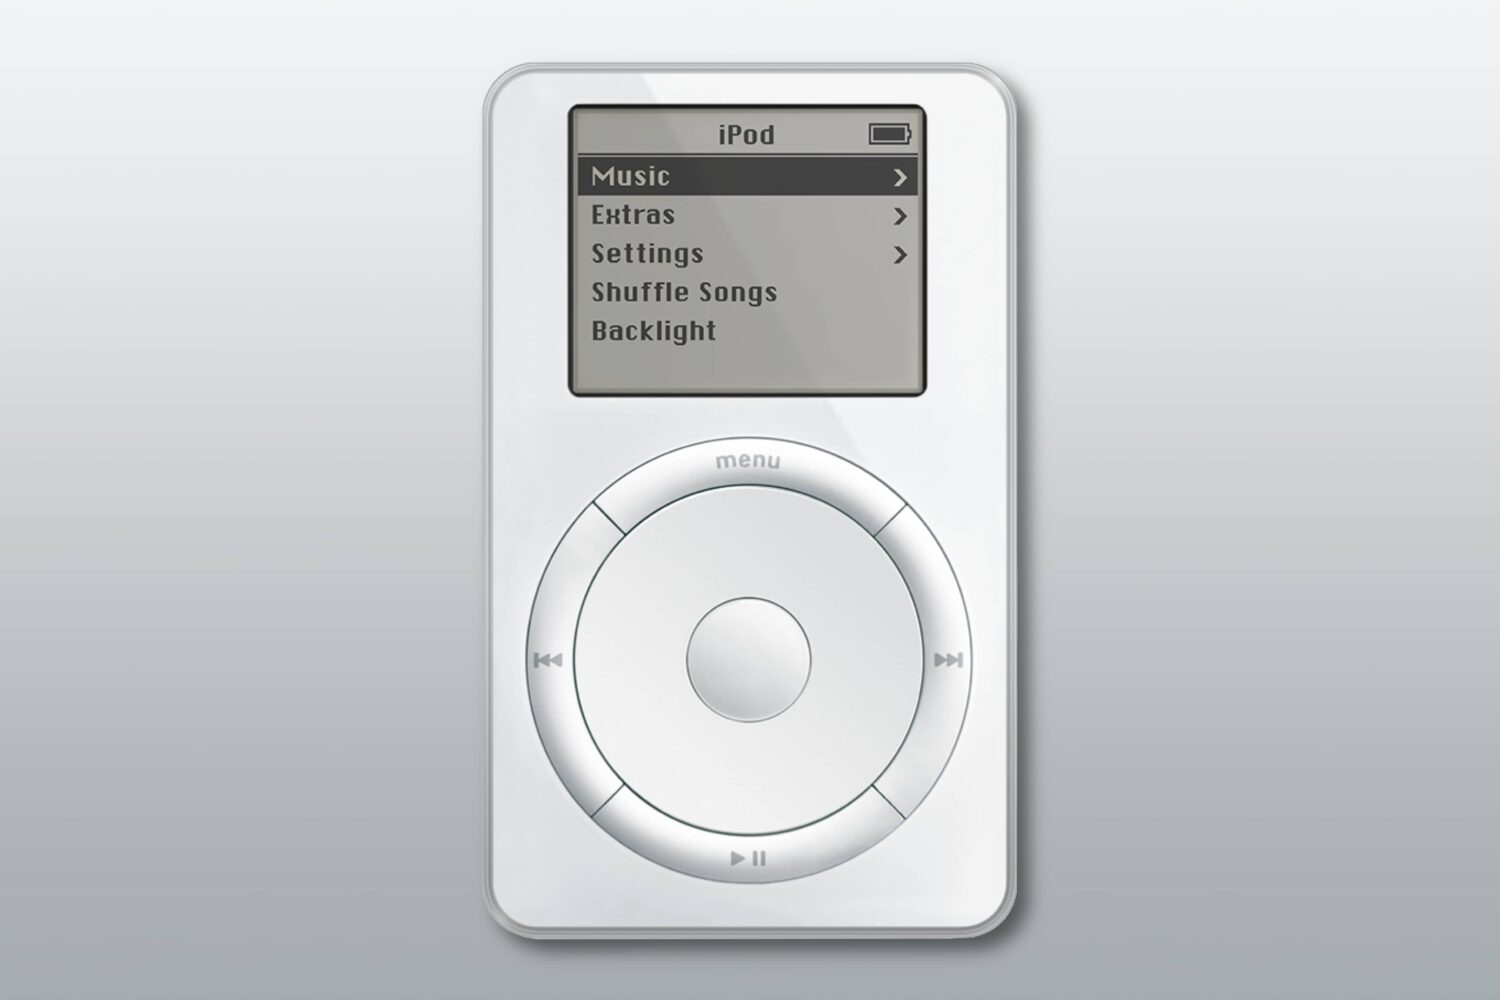 Apple's marketing image showing the front of the original model of the iPod music player, set against a light gray gradient background